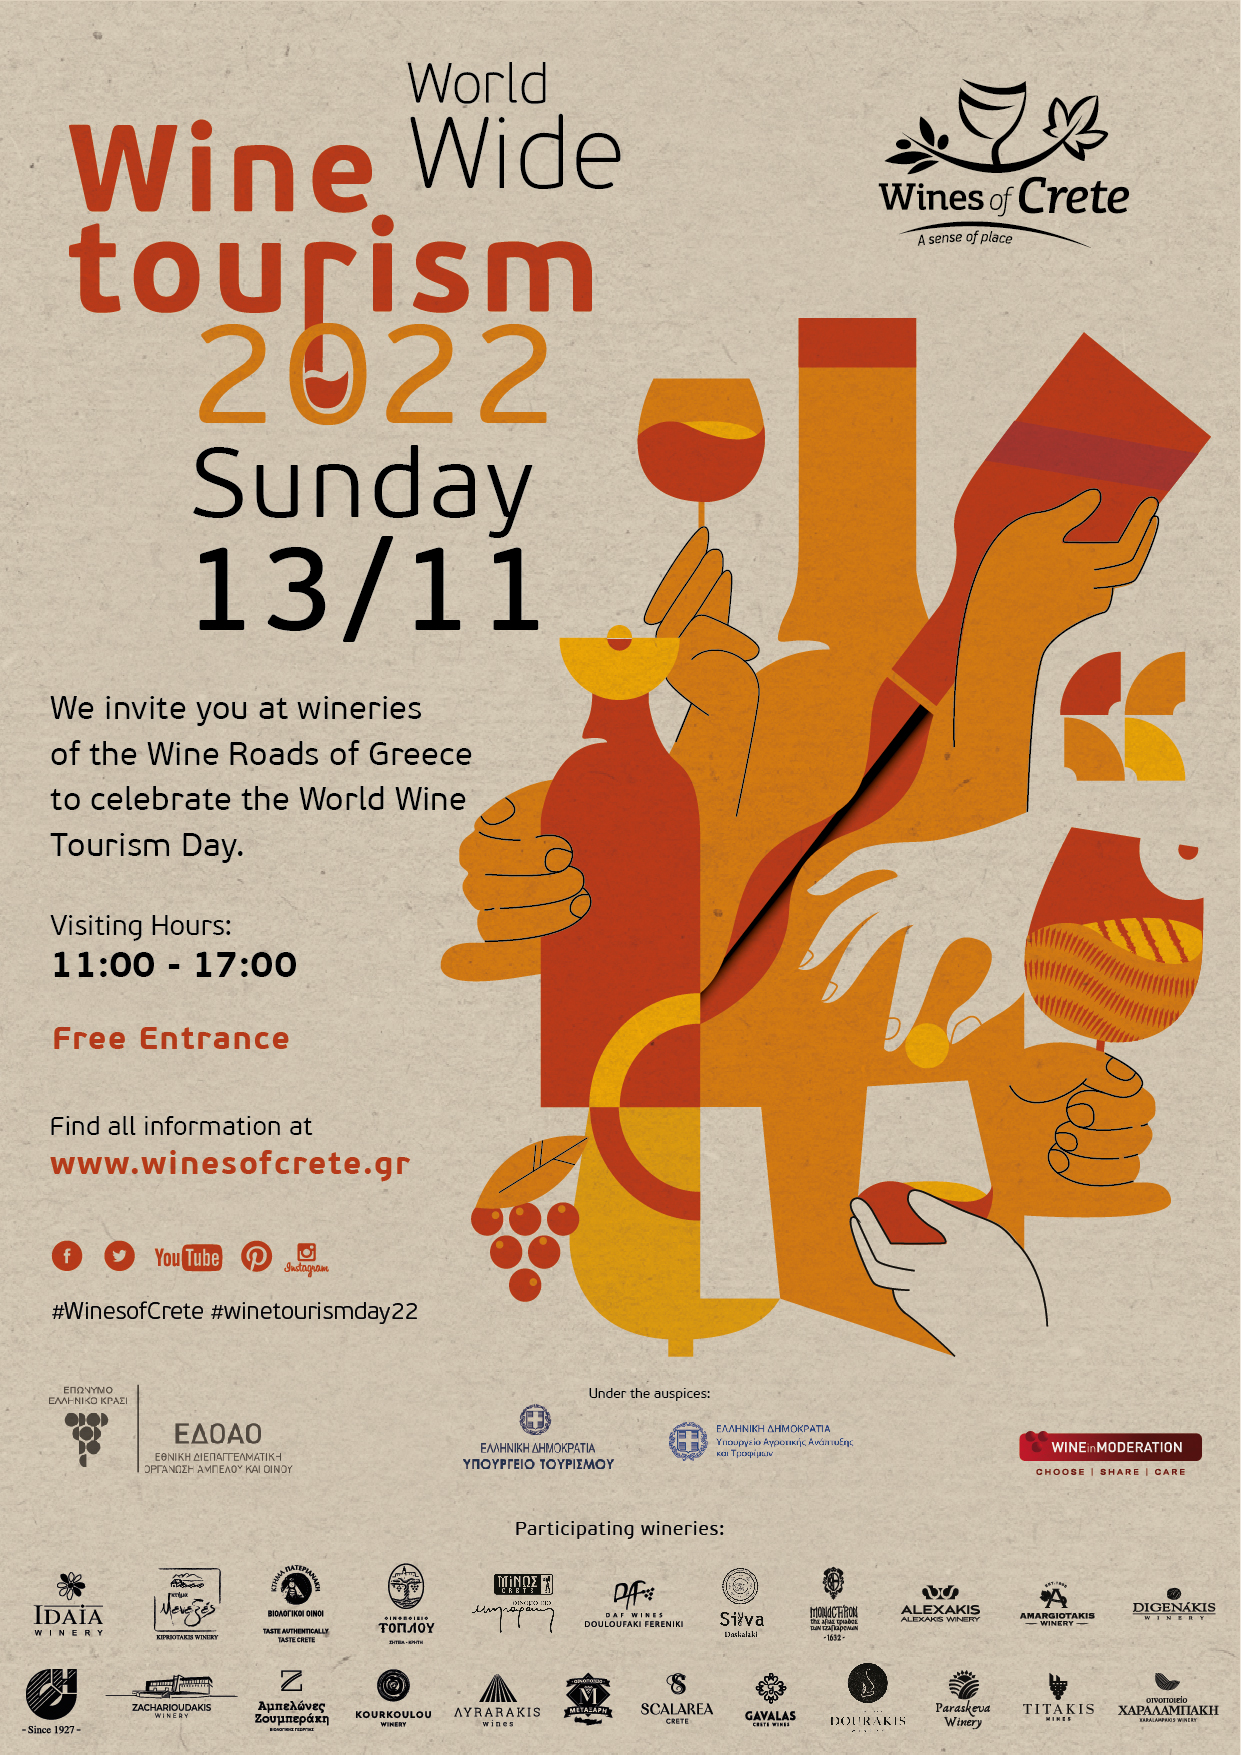 Celebrate Winetourism Day in Crete on Sunday the 13th of November 2022